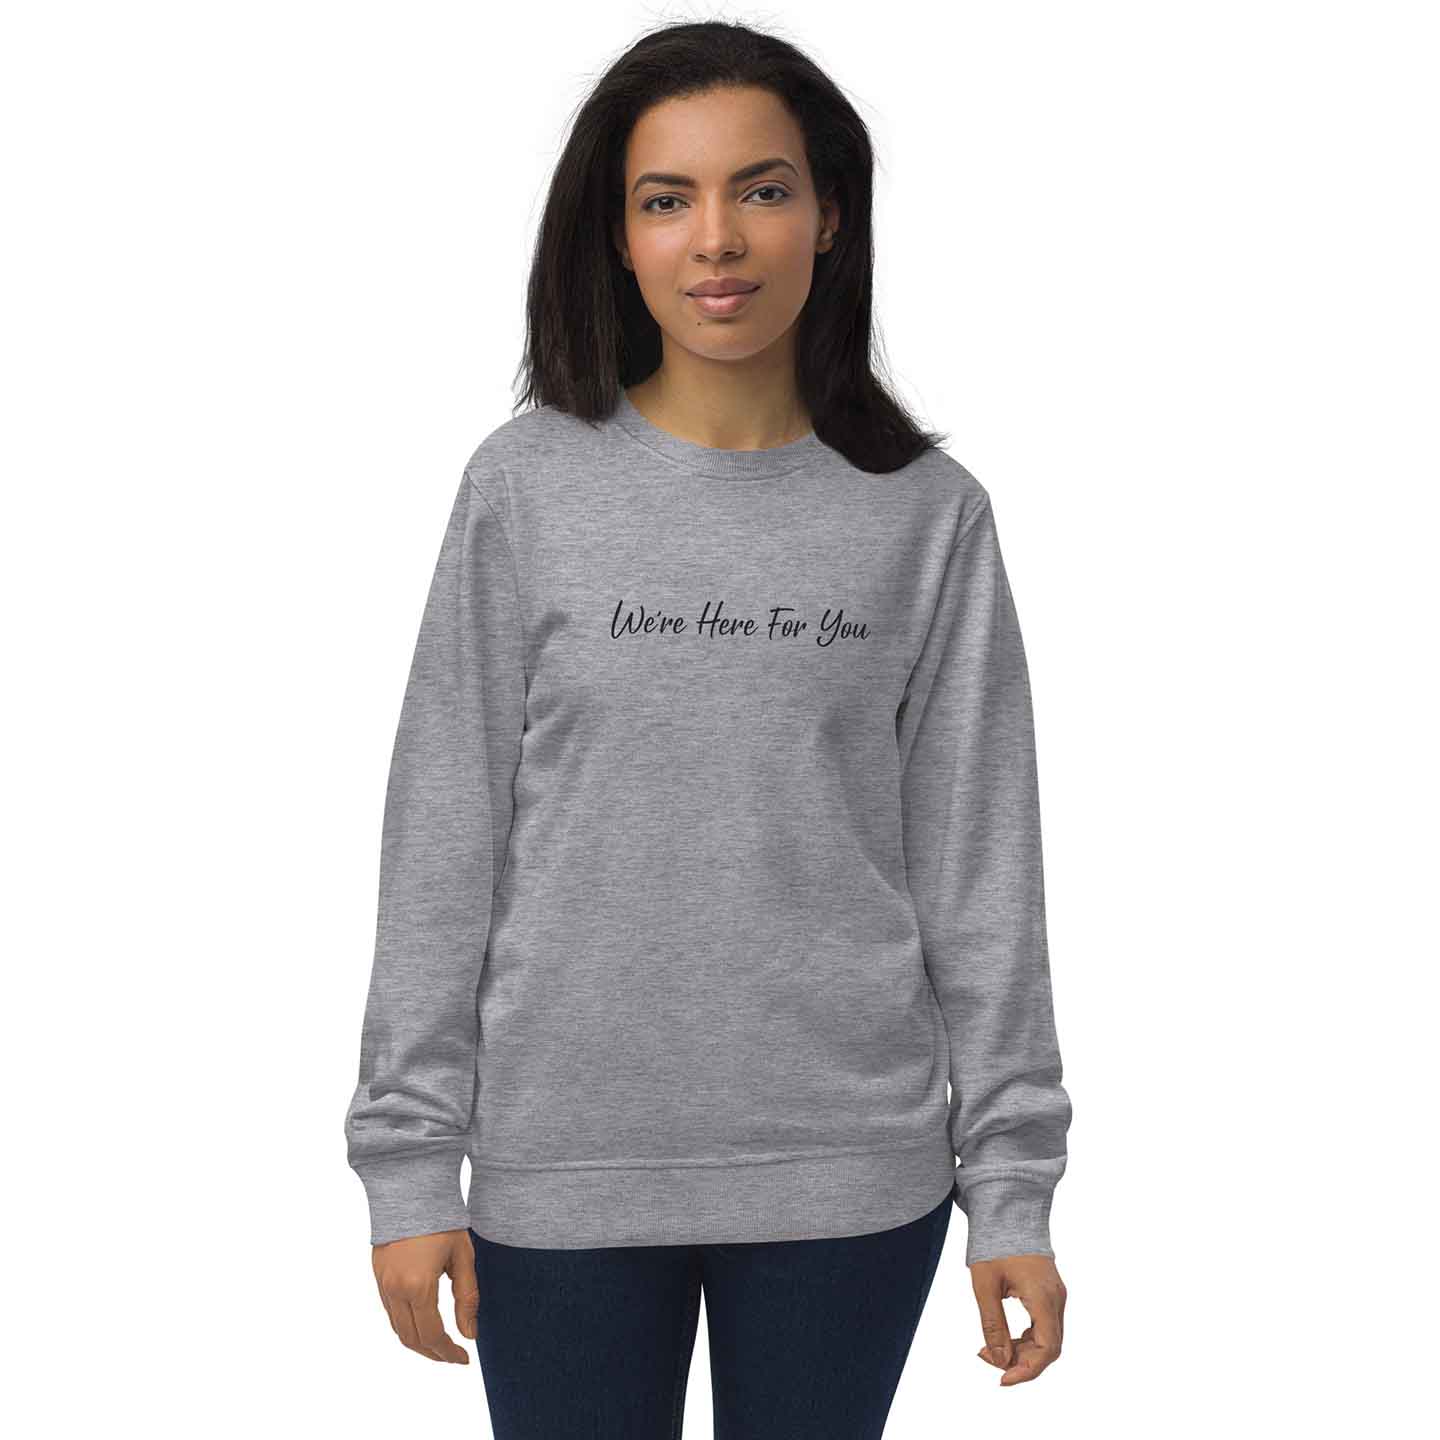 Women light gray organic cotton sweatshirt with inspirational quote, "We Are Here For You."